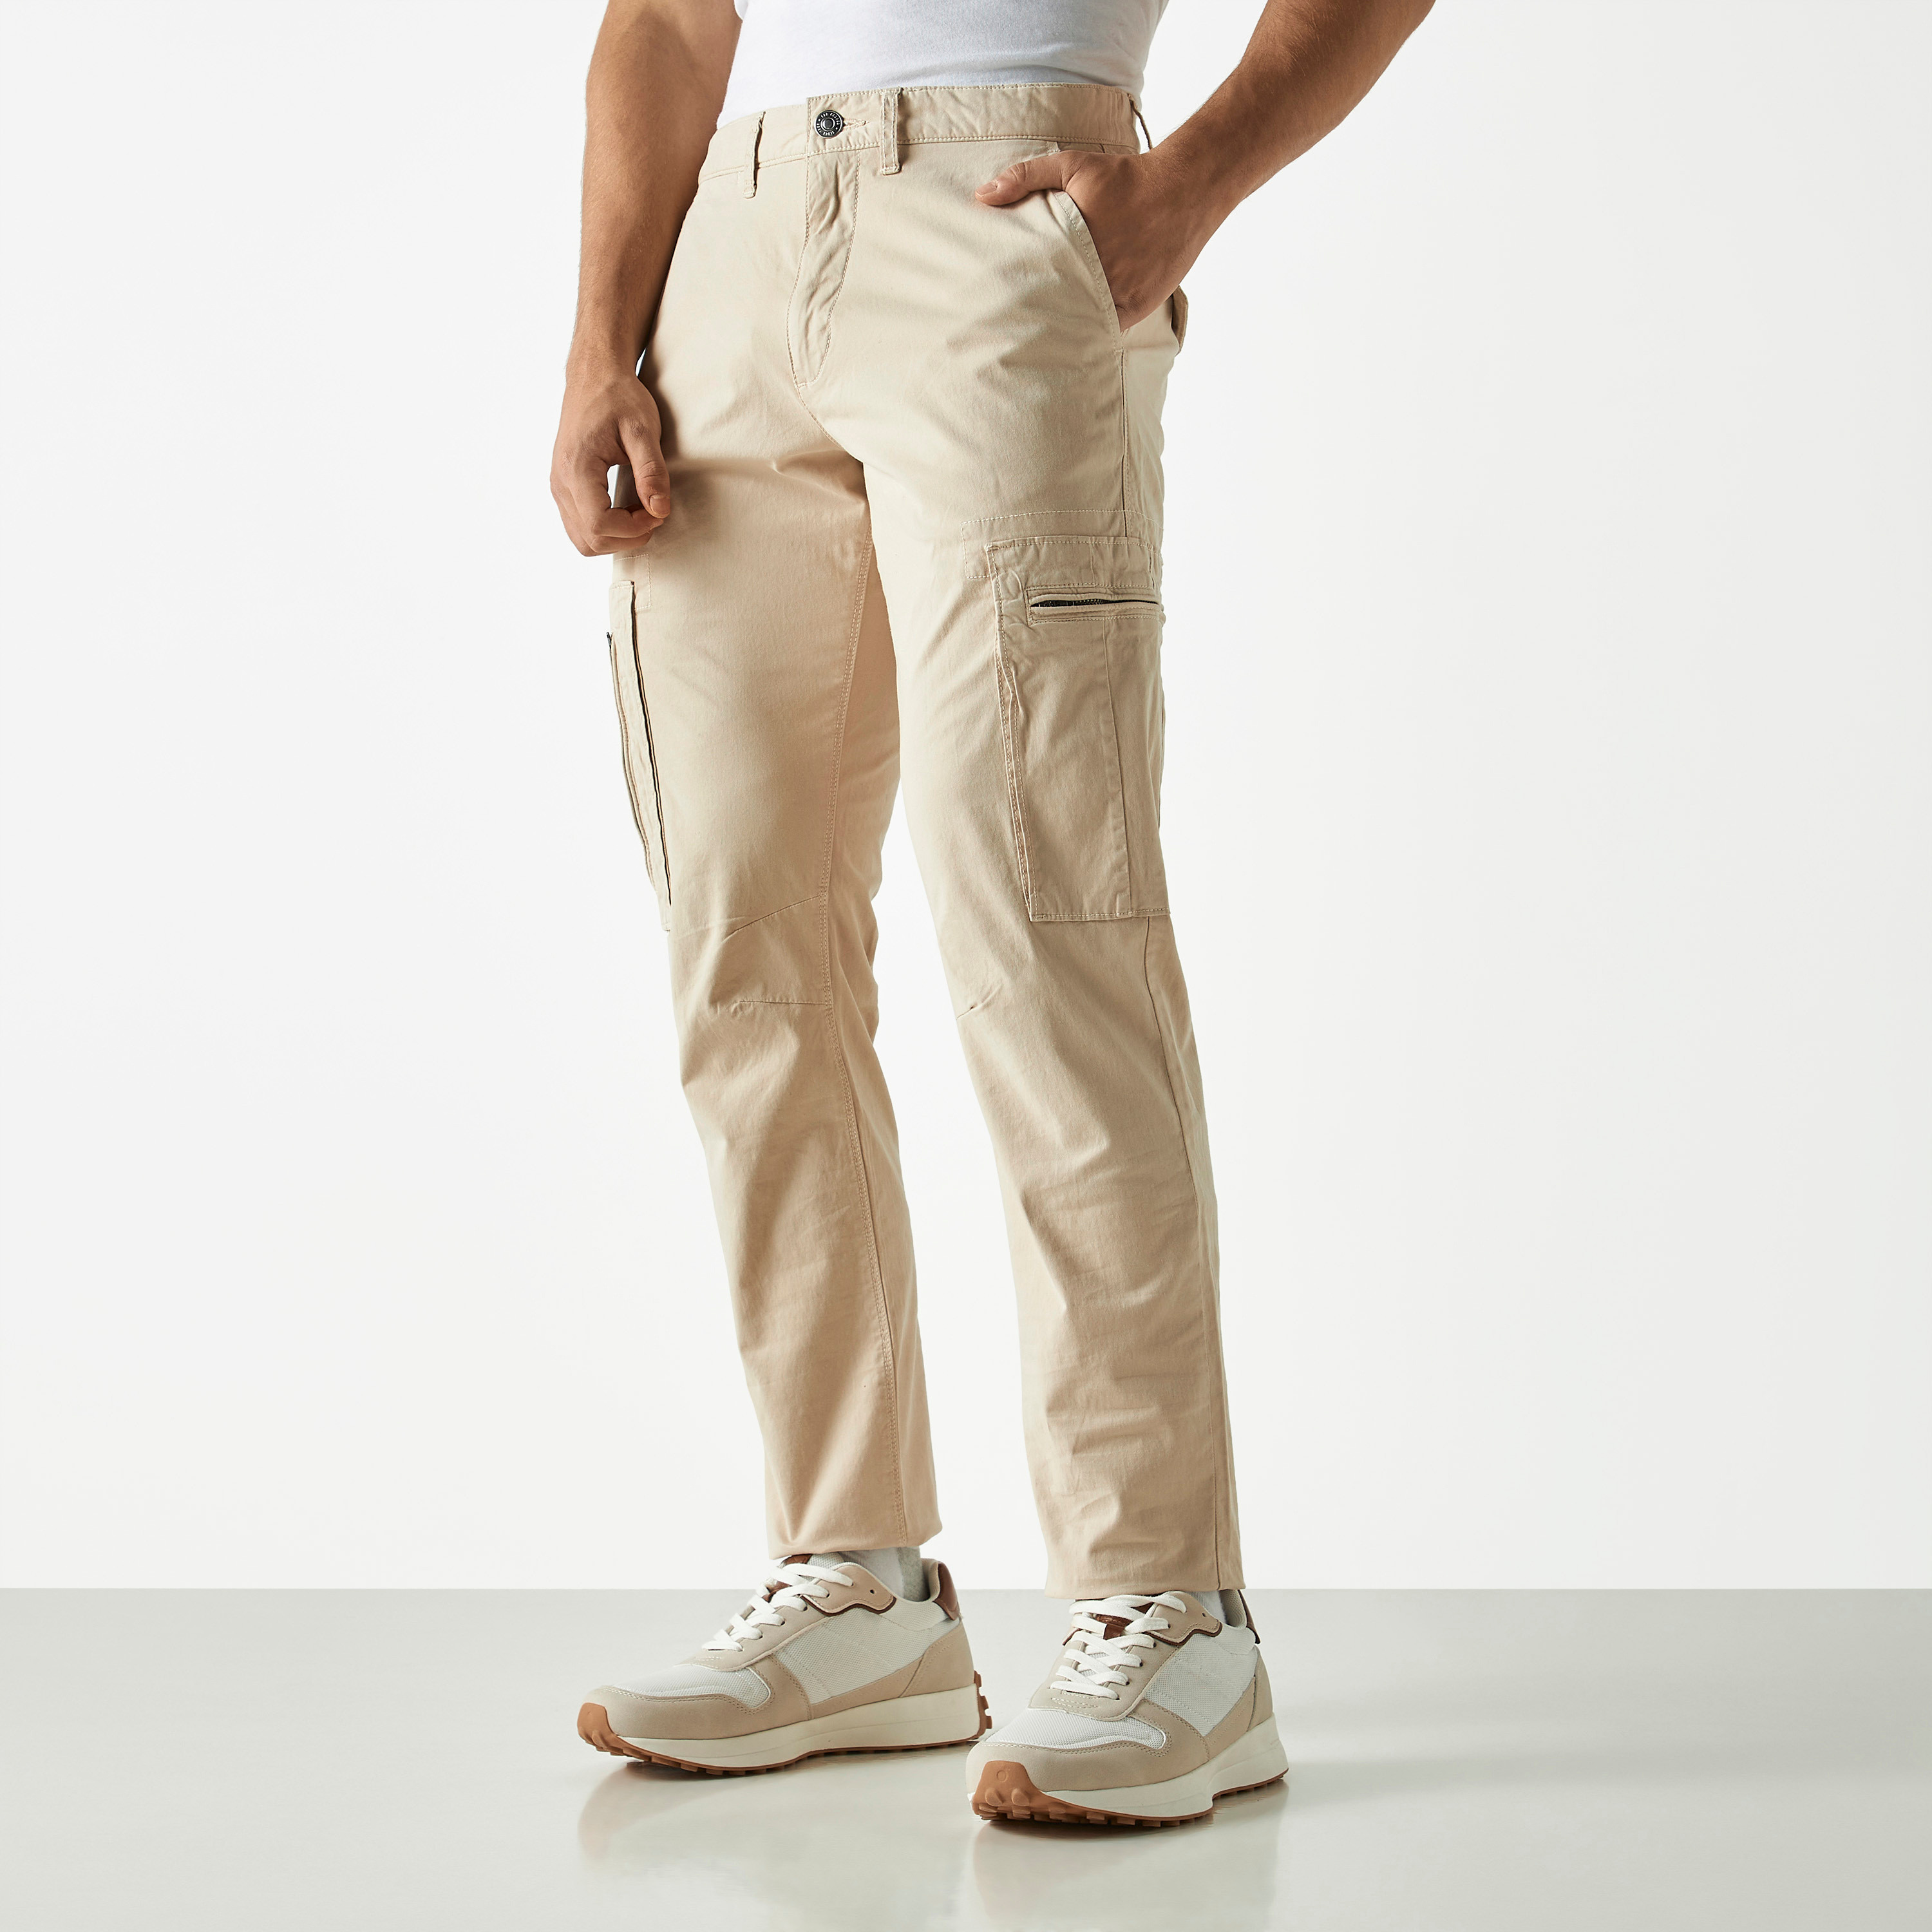 Lee Men's Extreme Motion Khaki Pant at Tractor Supply Co.